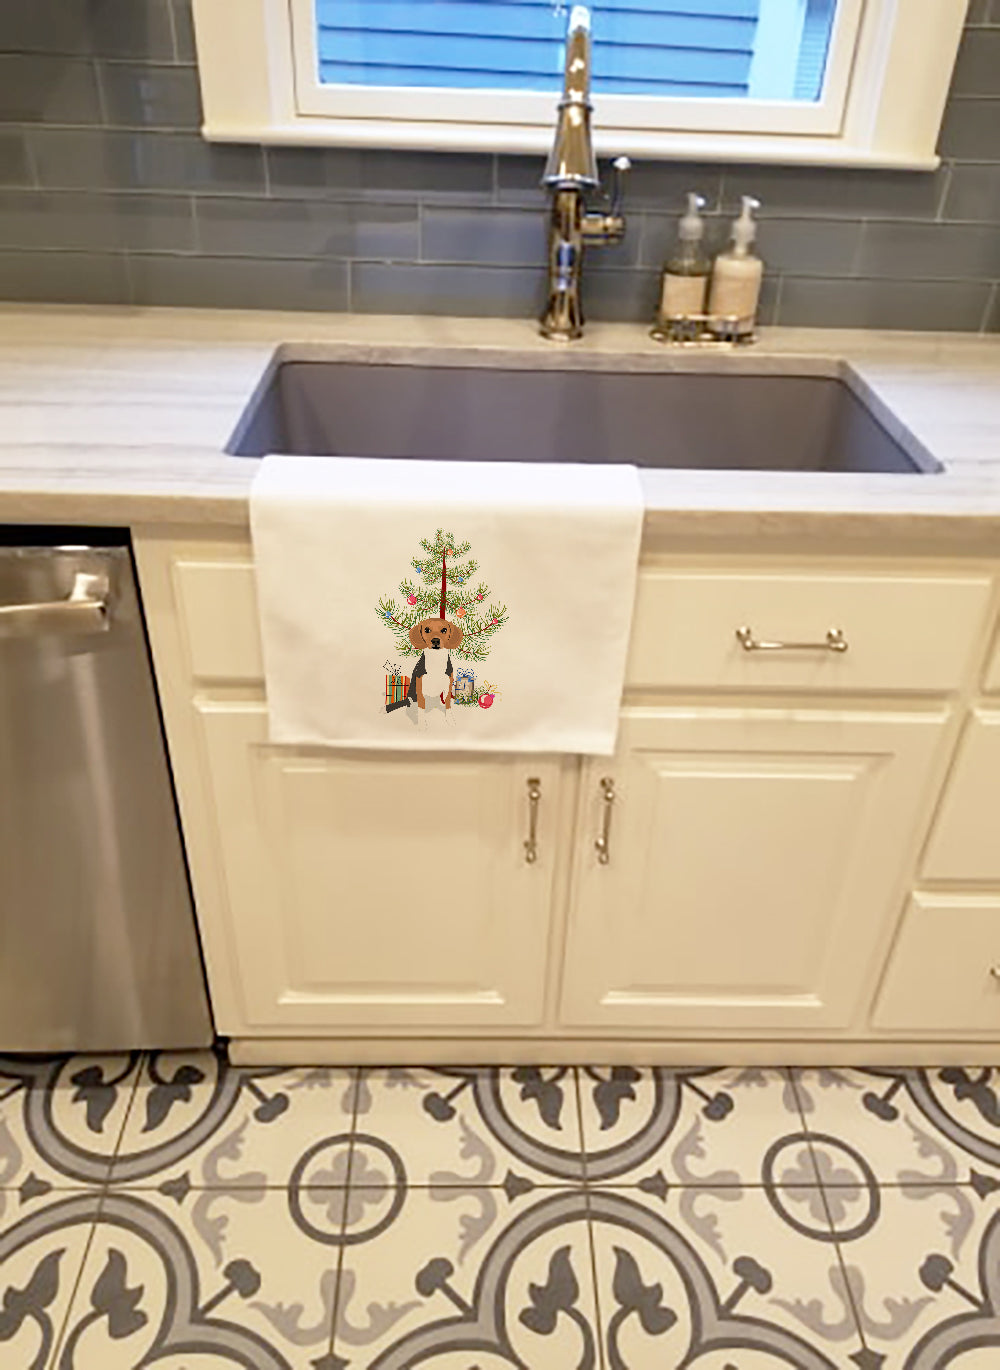 Buy this Beagle Tricolor #1 Christmas White Kitchen Towel Set of 2